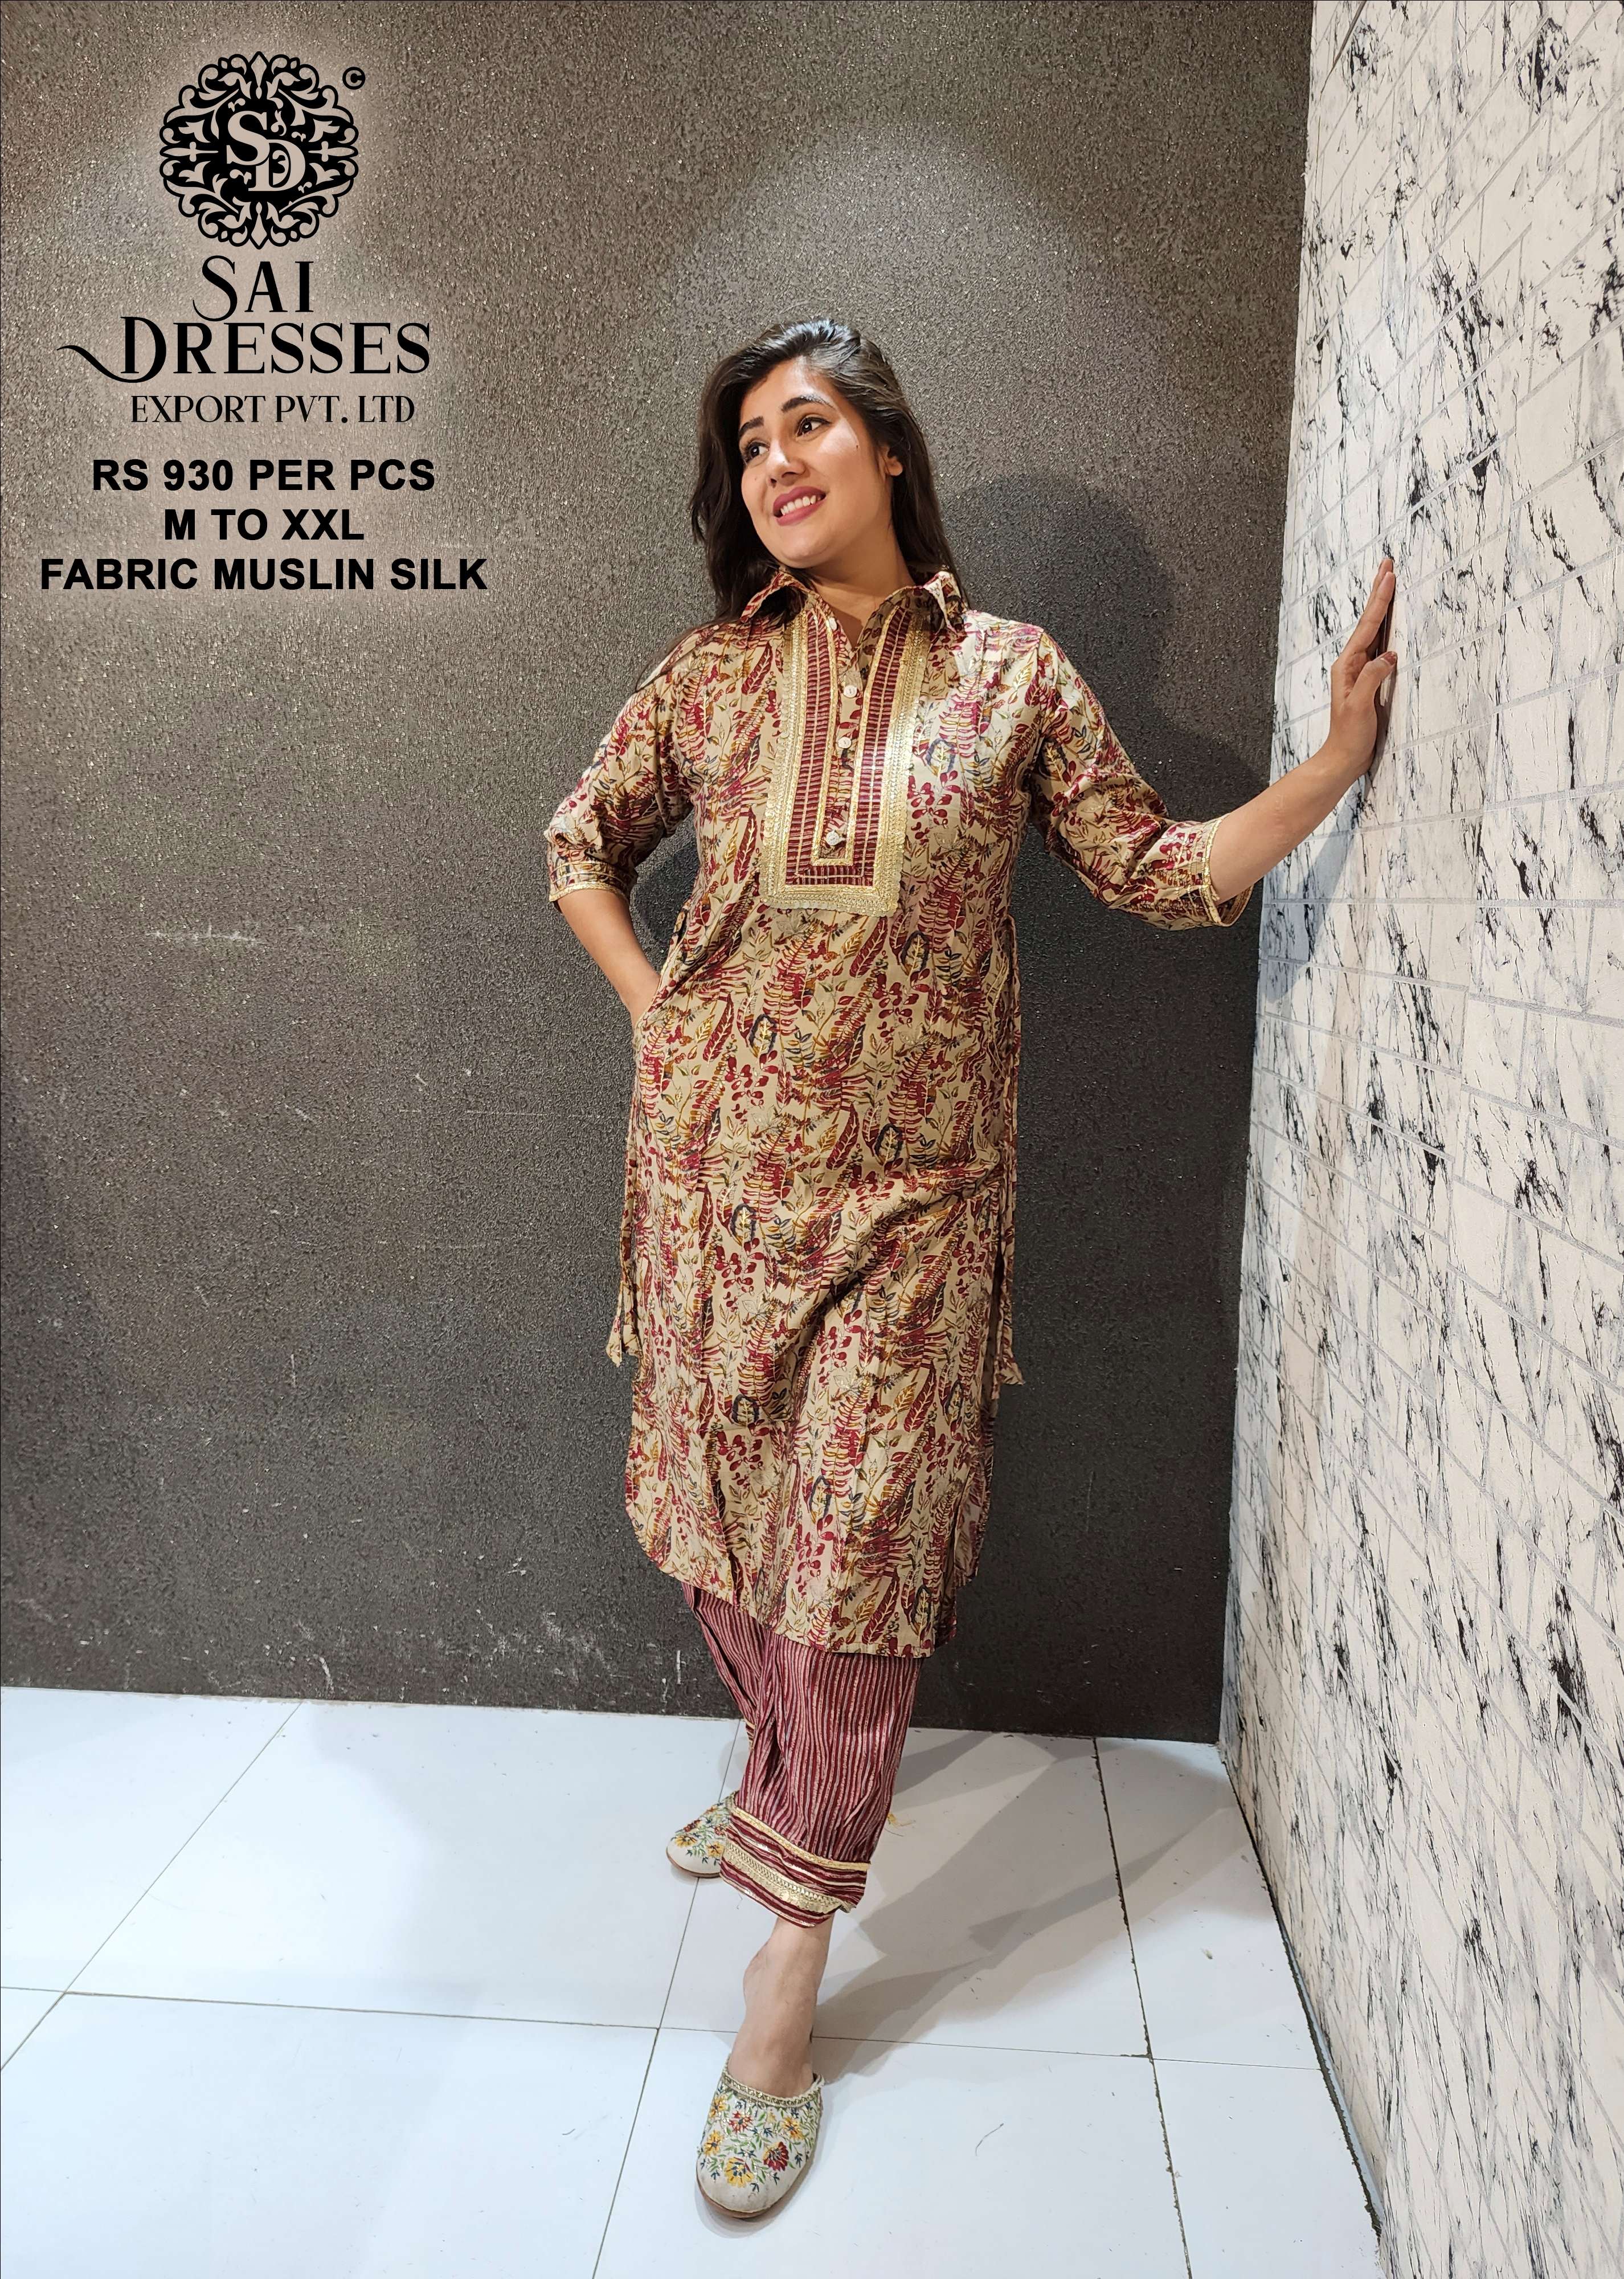 SAI DRESSES PRESENT D.NO 2060 READY TO EXCLUSIVE TRENDY WEAR PATHANI KURTA WITH AFGHANI PANT STYLE COMBO COLLECTION IN WHOLESALE RATE IN SURAT